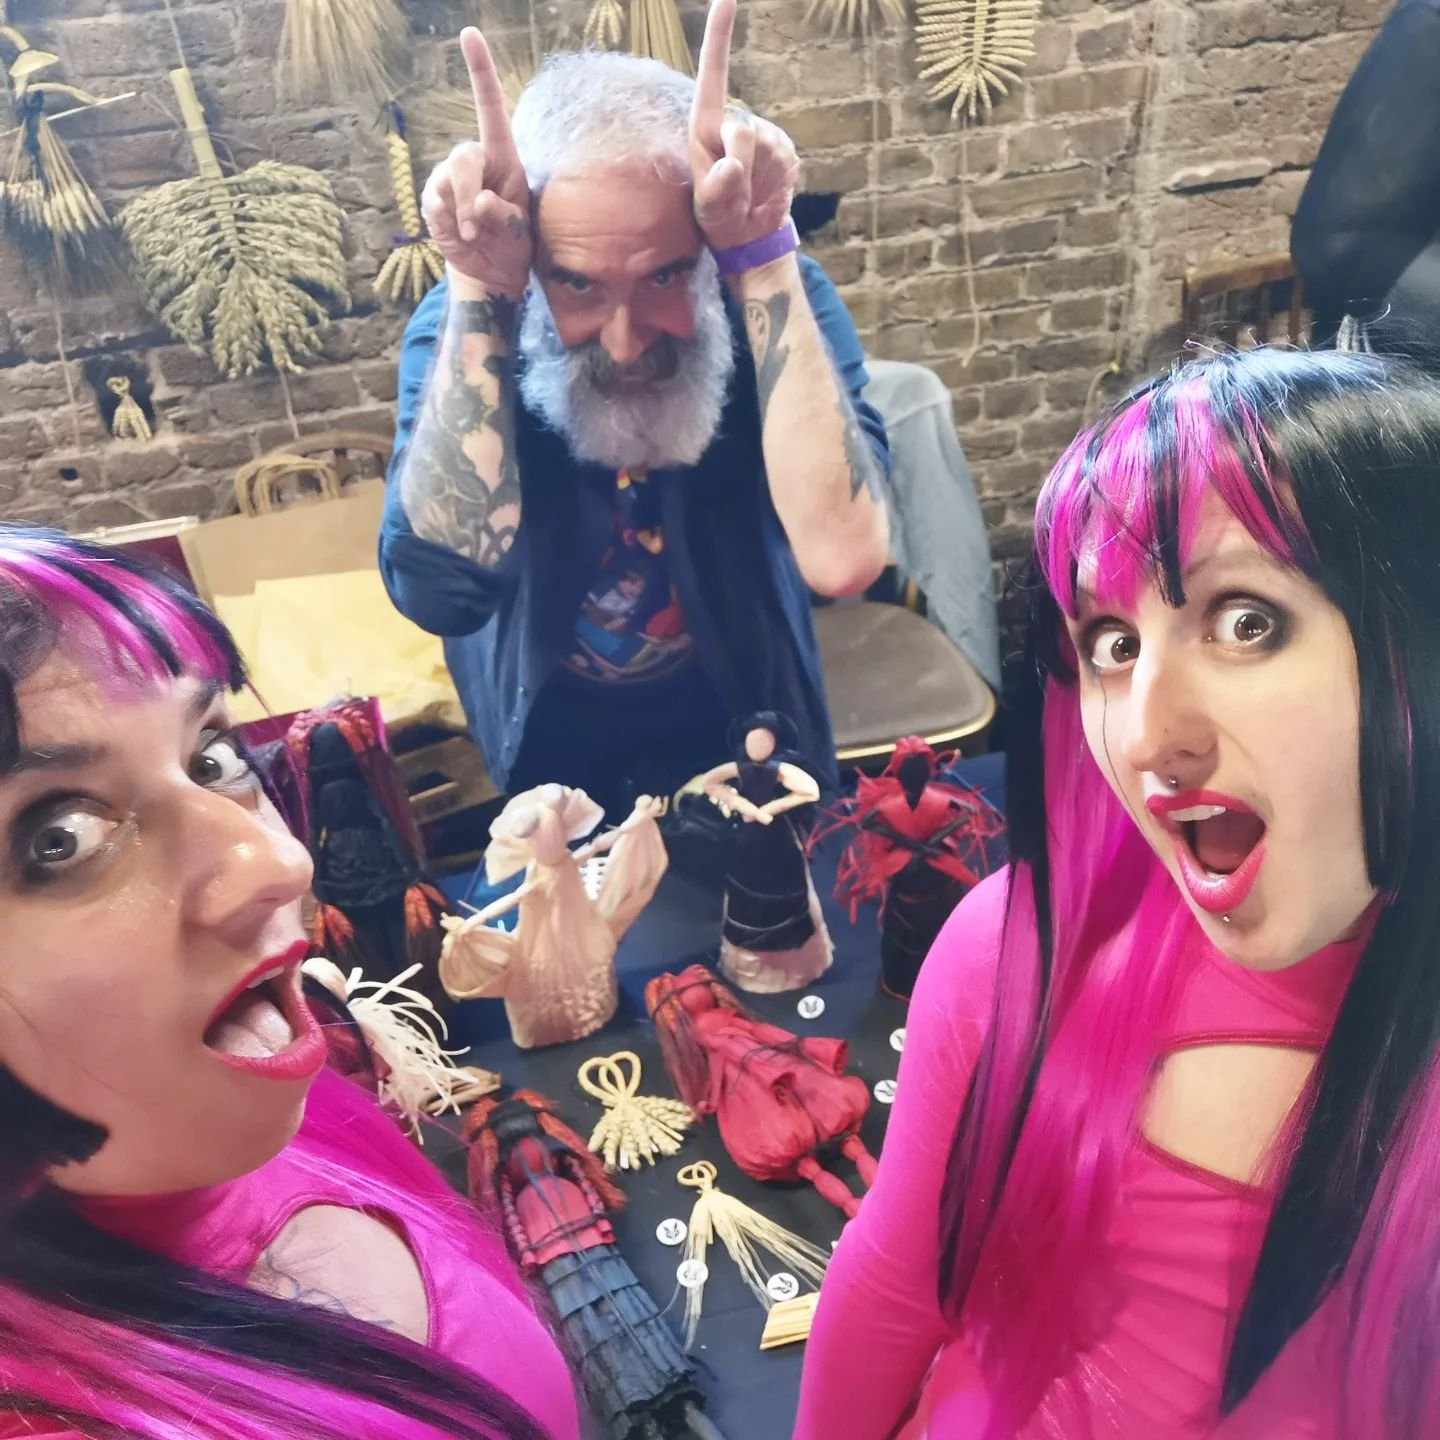 Freshly landed from our holidays we rolled into the @satanicfleamarket Dark Arts Fayre at @thevanguardcamden last Sunday, bringing all the sensory children and our one of a kind clothes. It was really sweet to see a sea of friendly familiar faces and